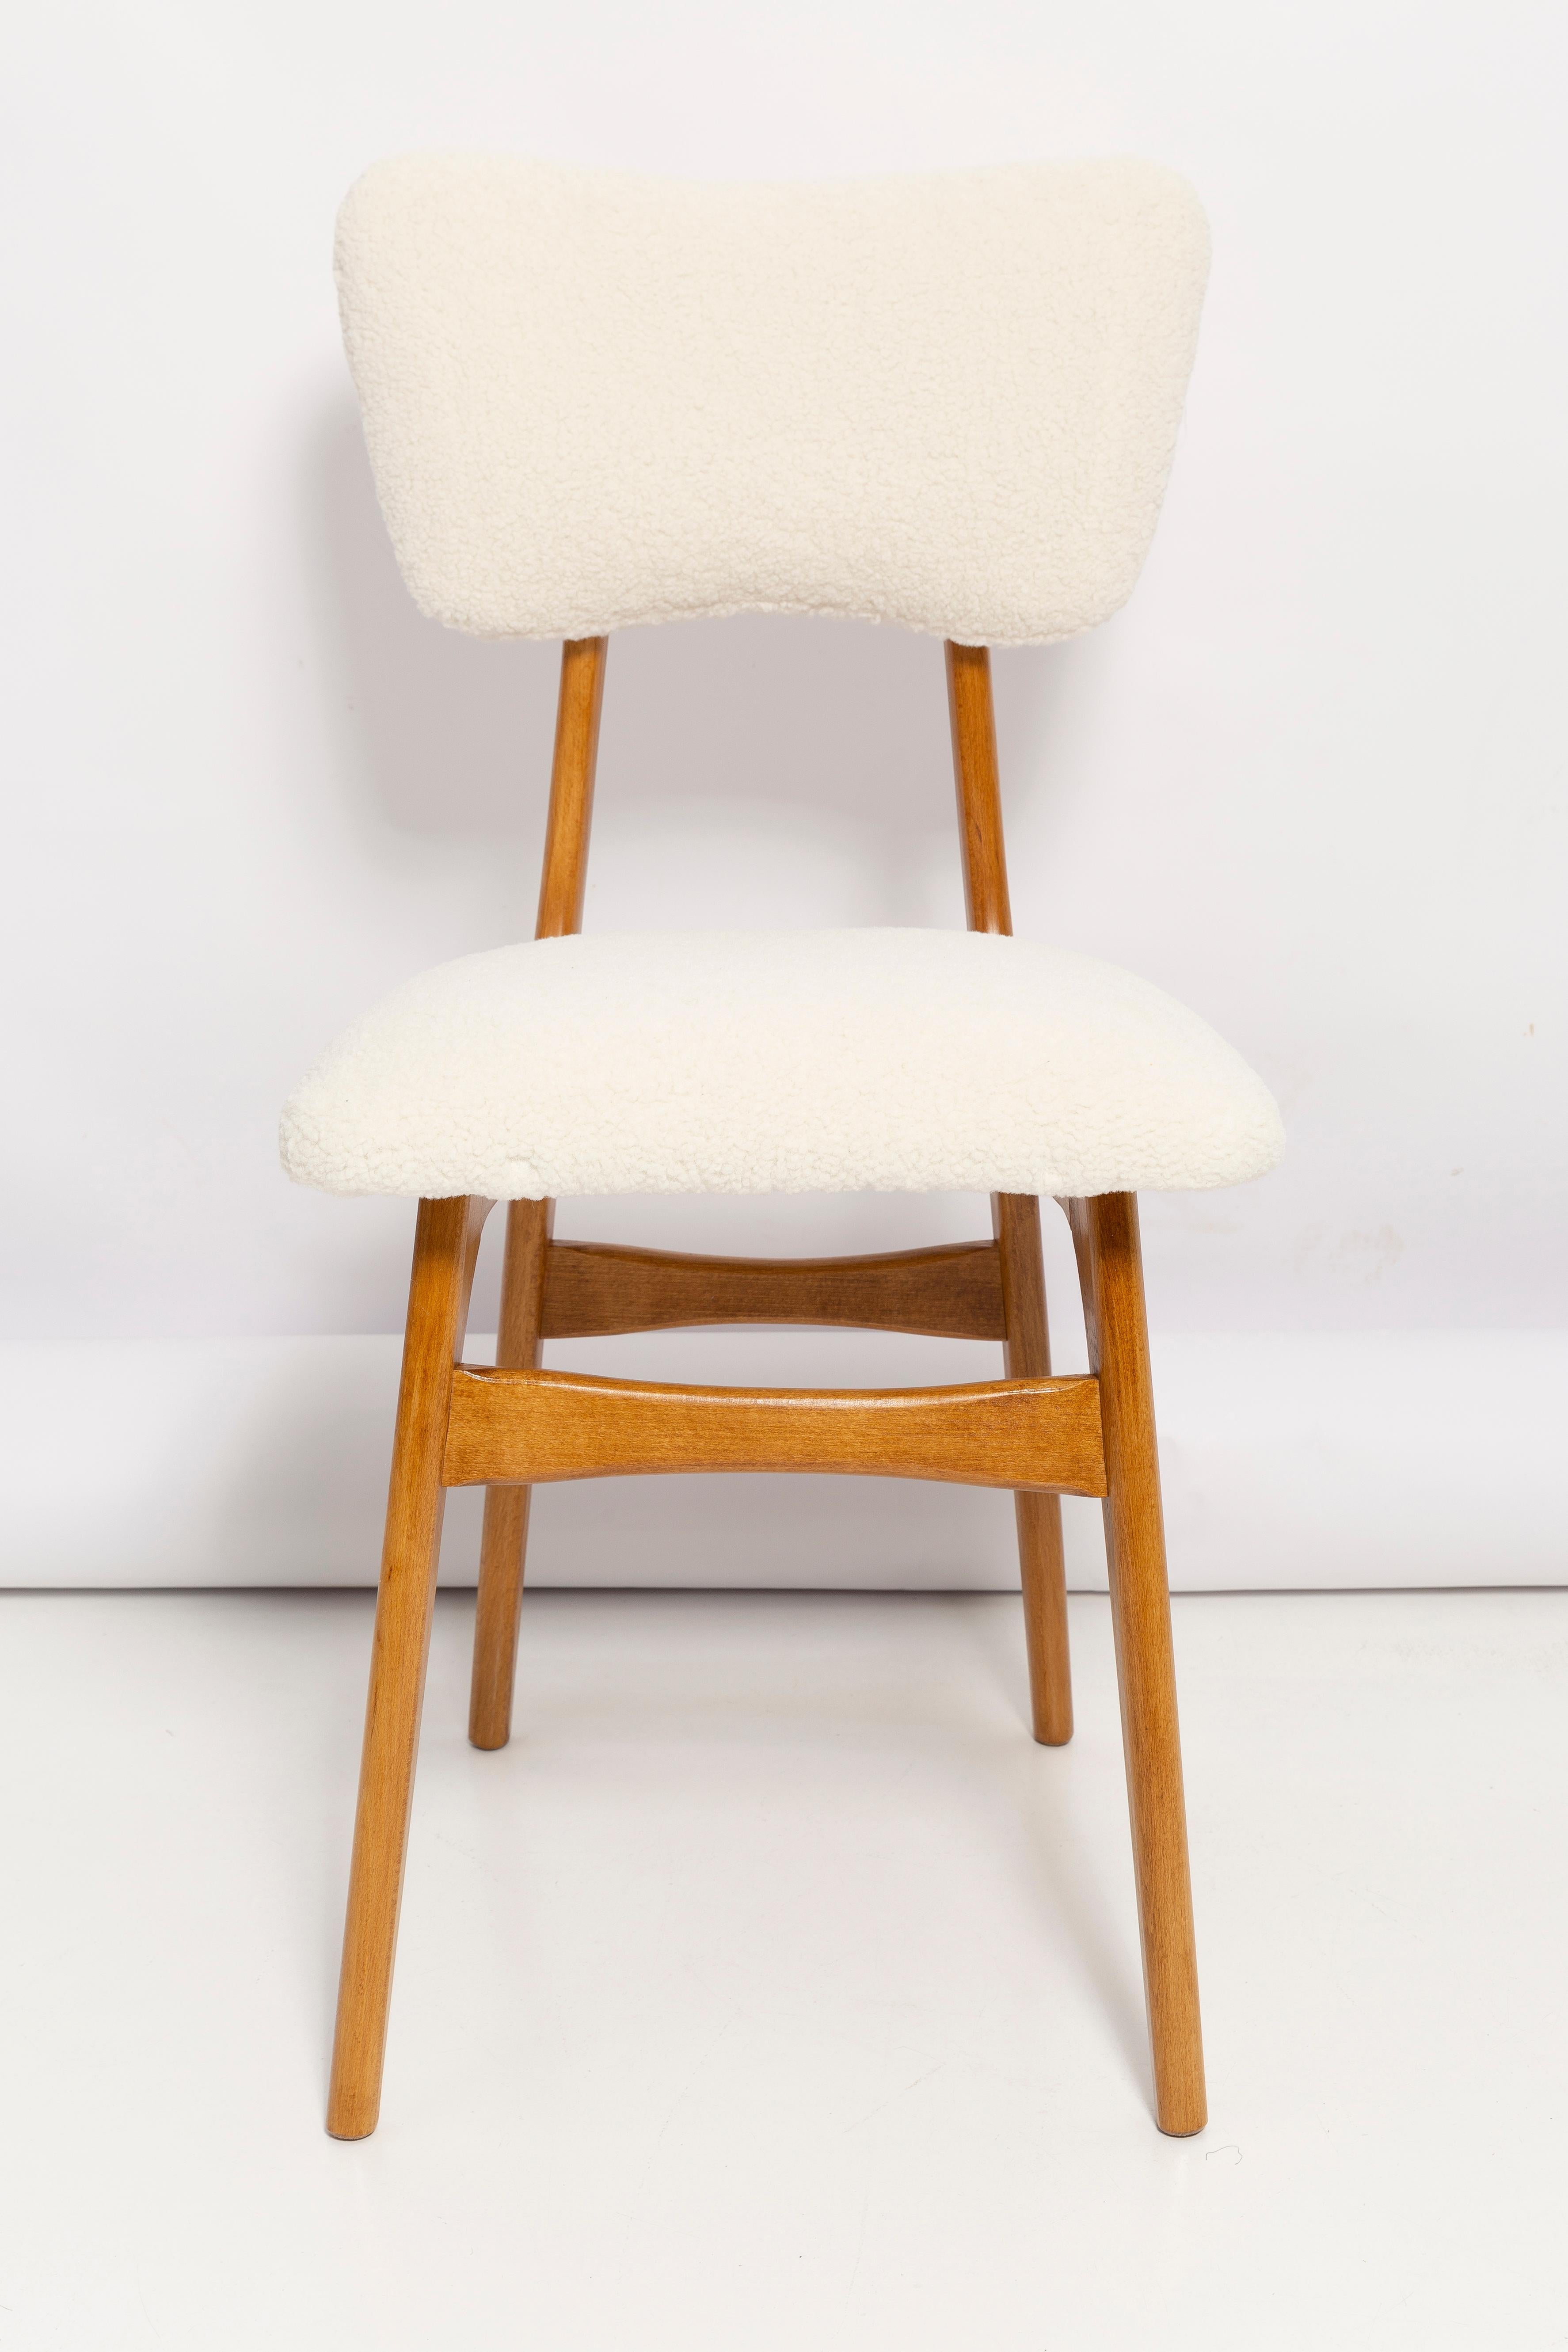 Set of Twelve 20th Century Cream Boucle Butterfly Chairs, 1960s, Poland For Sale 6